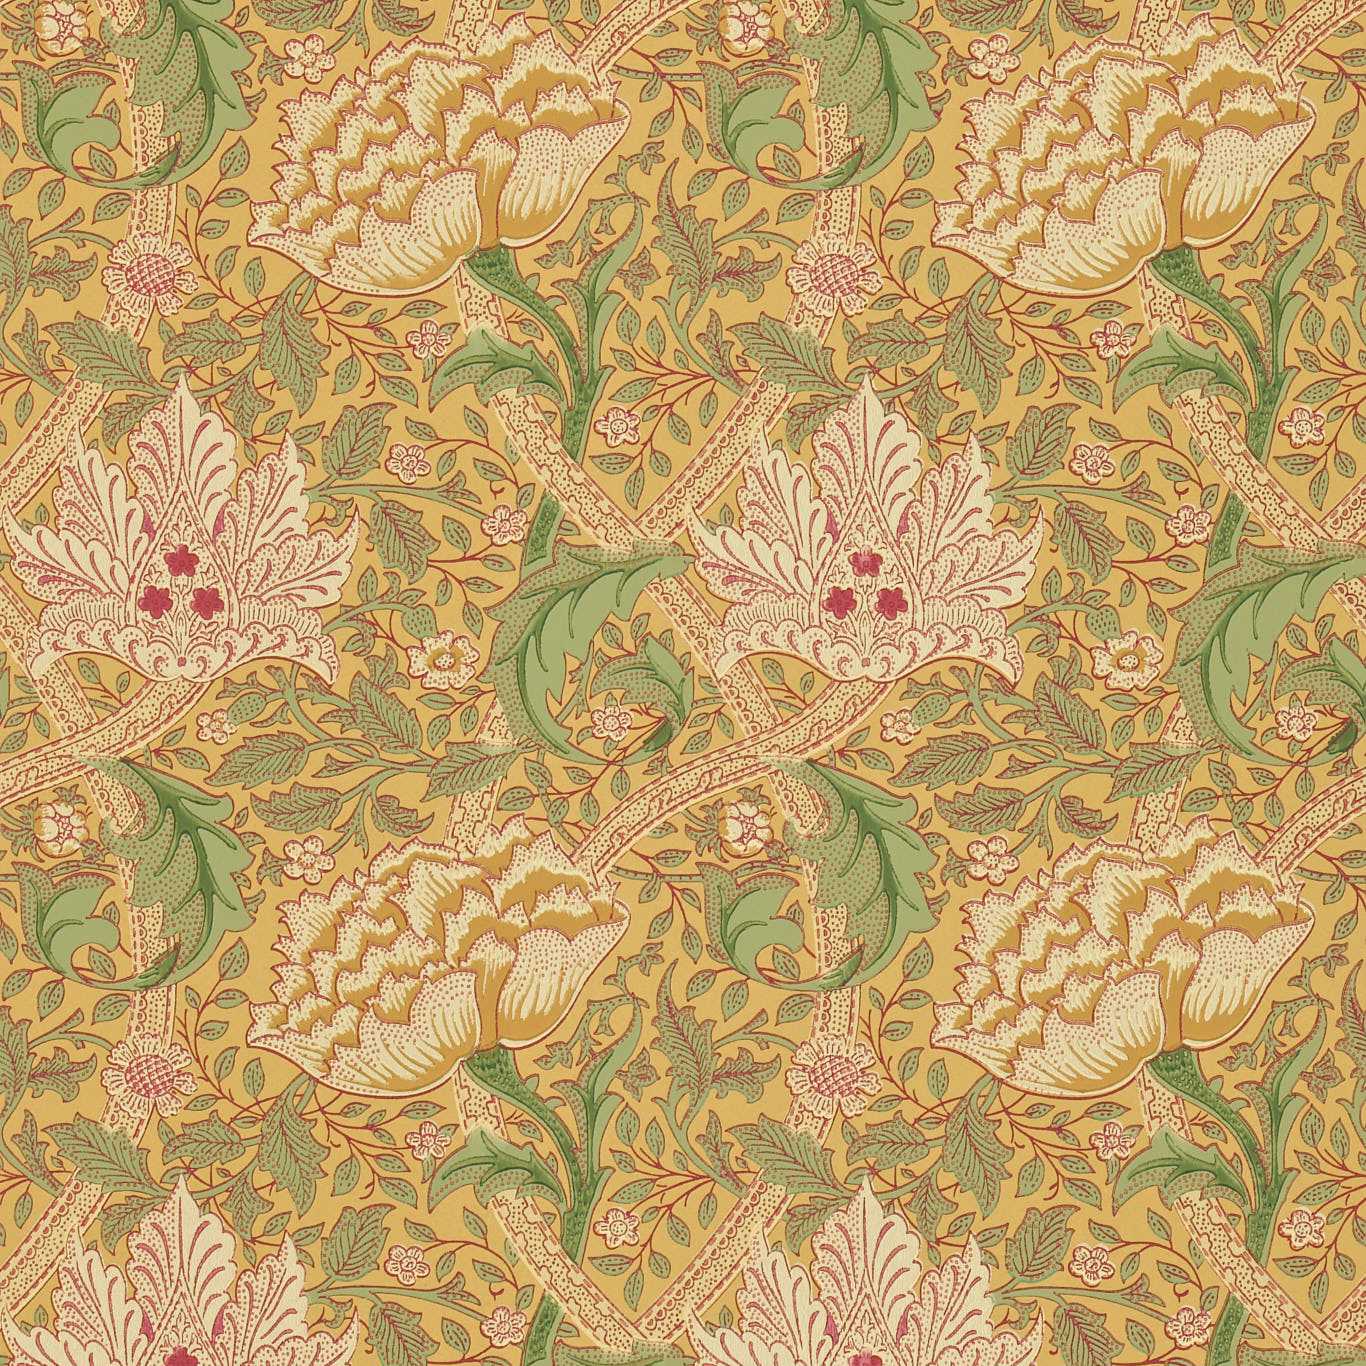 Windrush Gold & Thyme Wallpaper DMCW210494 by Morris & Co